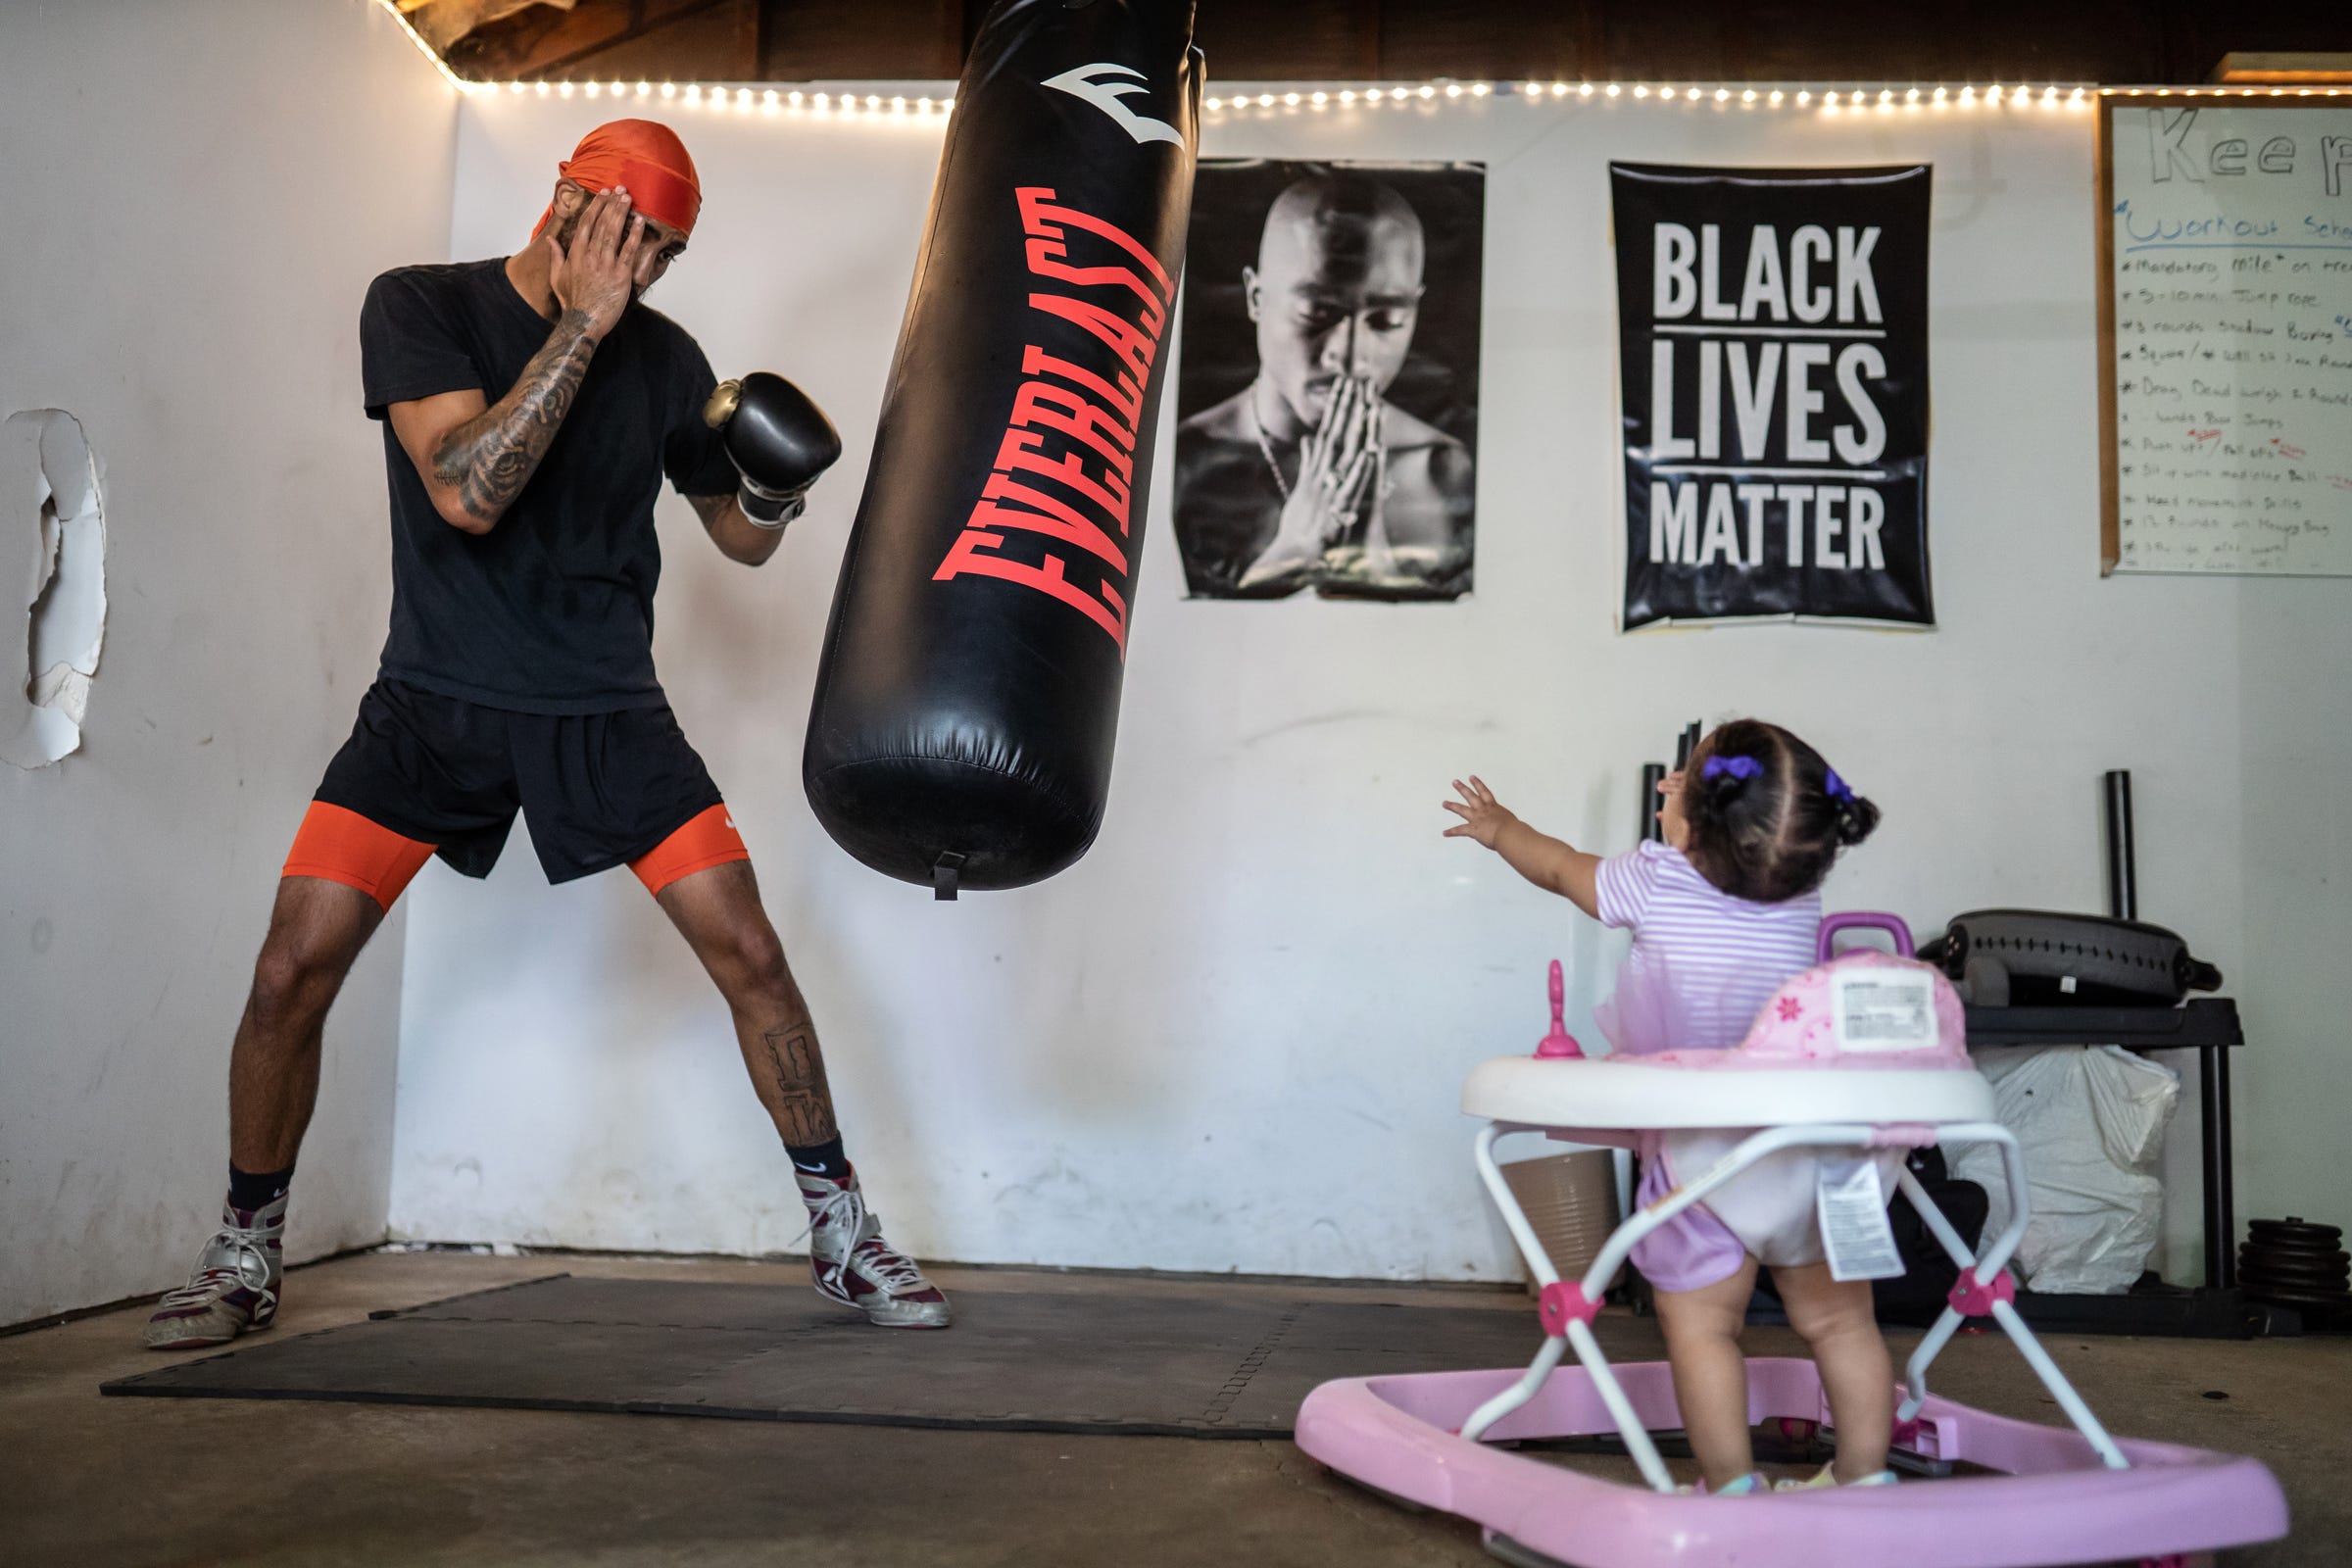 Dwayne Taylor, of Lincoln Park, does a timed drill while training for his professional boxing debut in his garage as his daughter Ari Taylor watches from her walker on Tuesday, June 15, 2021. "I'm not just doing it for myself. I'm doing it for my whole family - for my kids now," Taylor said. He wants to give them a different life with more options. "I'd like to break the cycle. The first one to change something. My family's been struggling for a long time. It's bigger than me now."